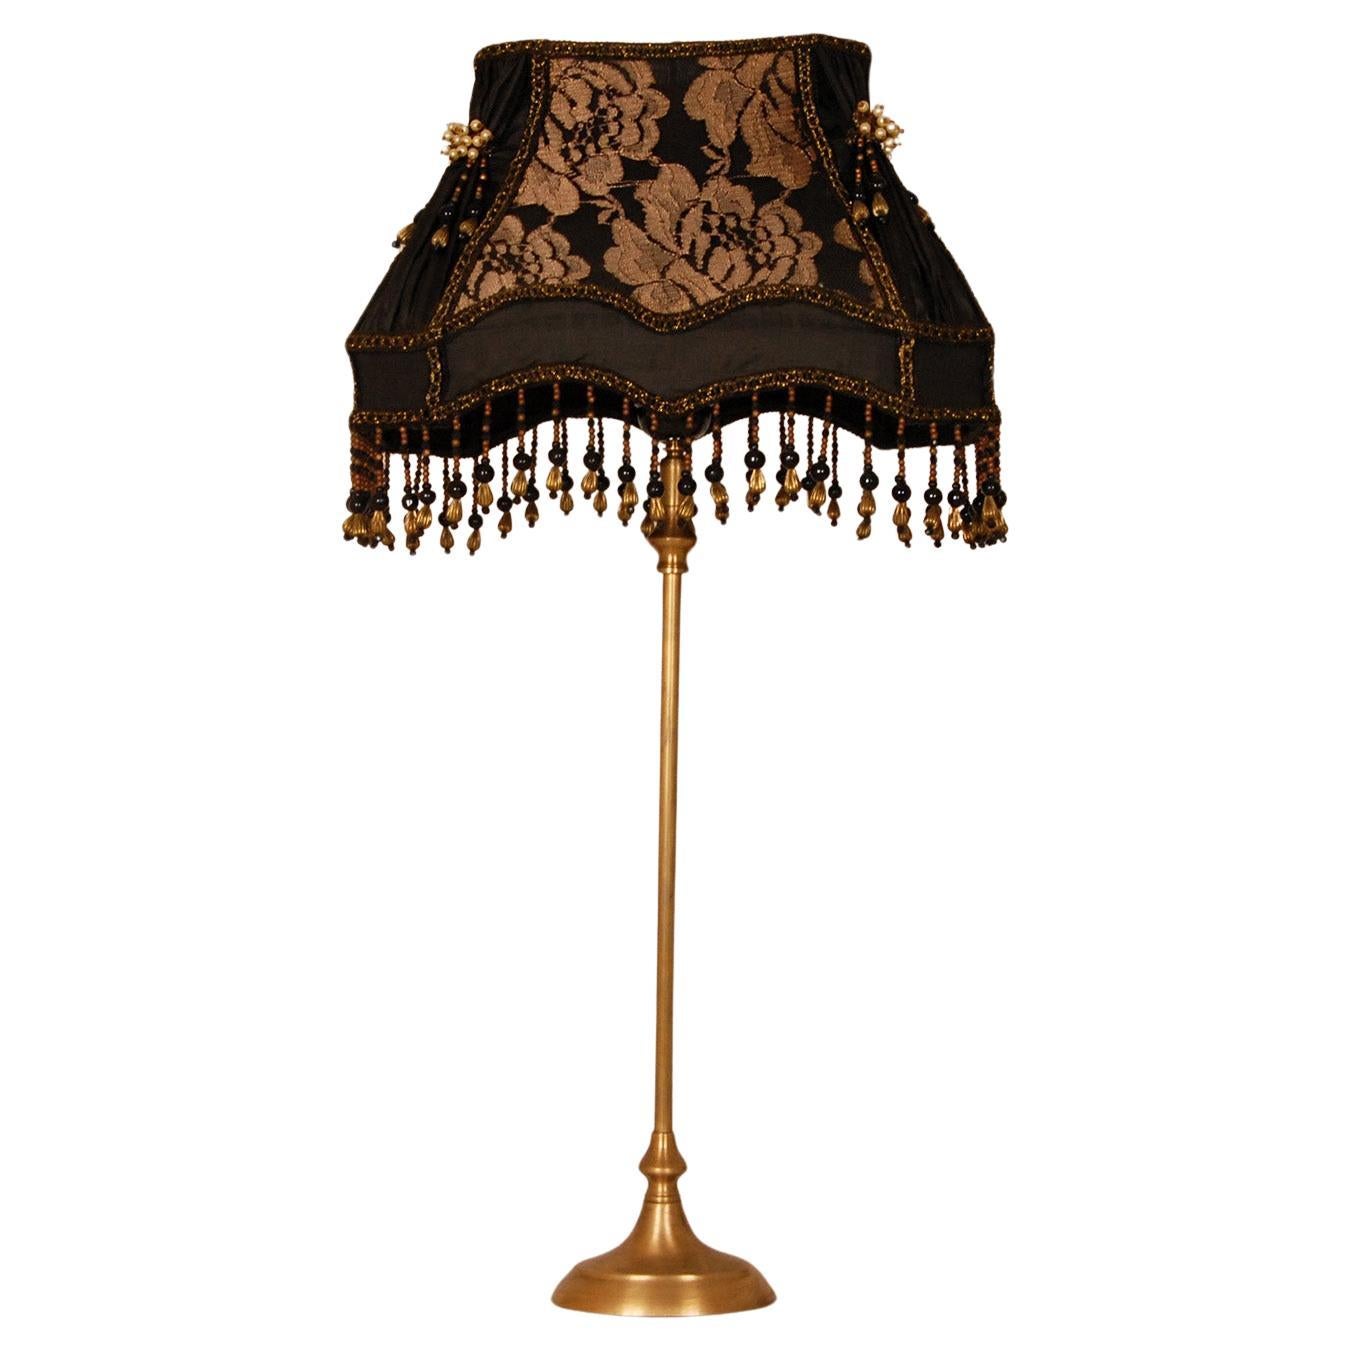 Vintage French Baroque Lamp Fringed Beaded 1970s Gold and Black